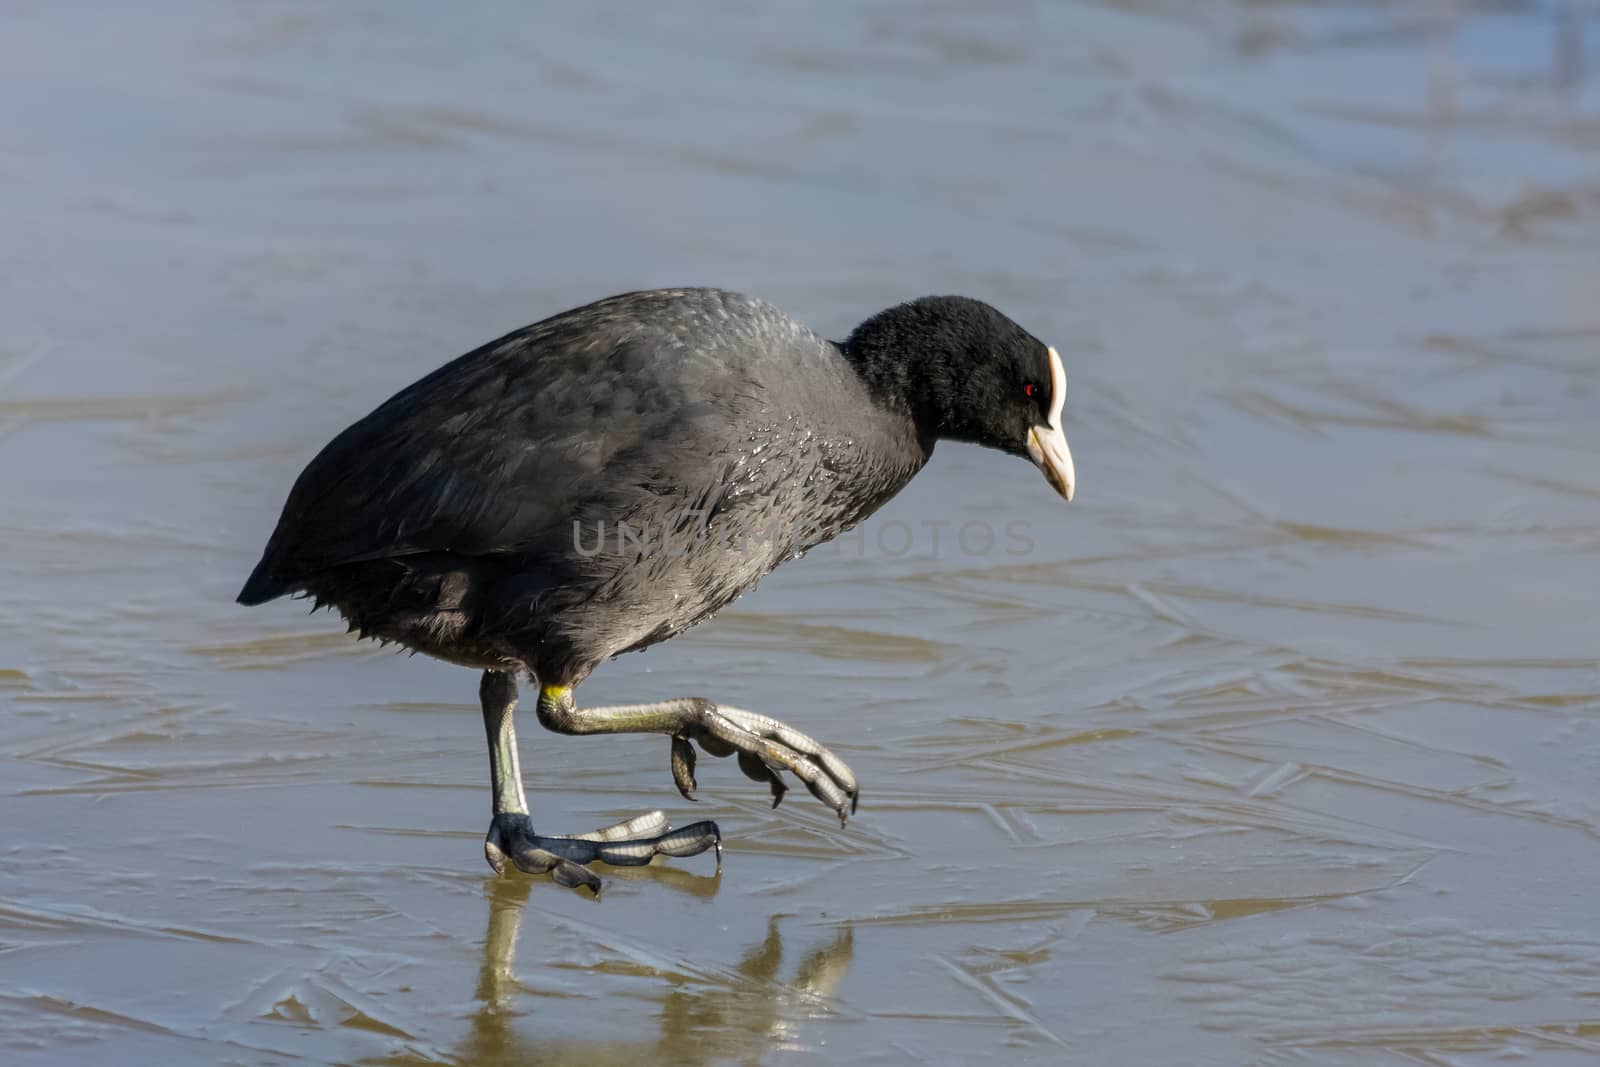 Coot (Fulcia atra) Gingerly Walking on the Ice by phil_bird